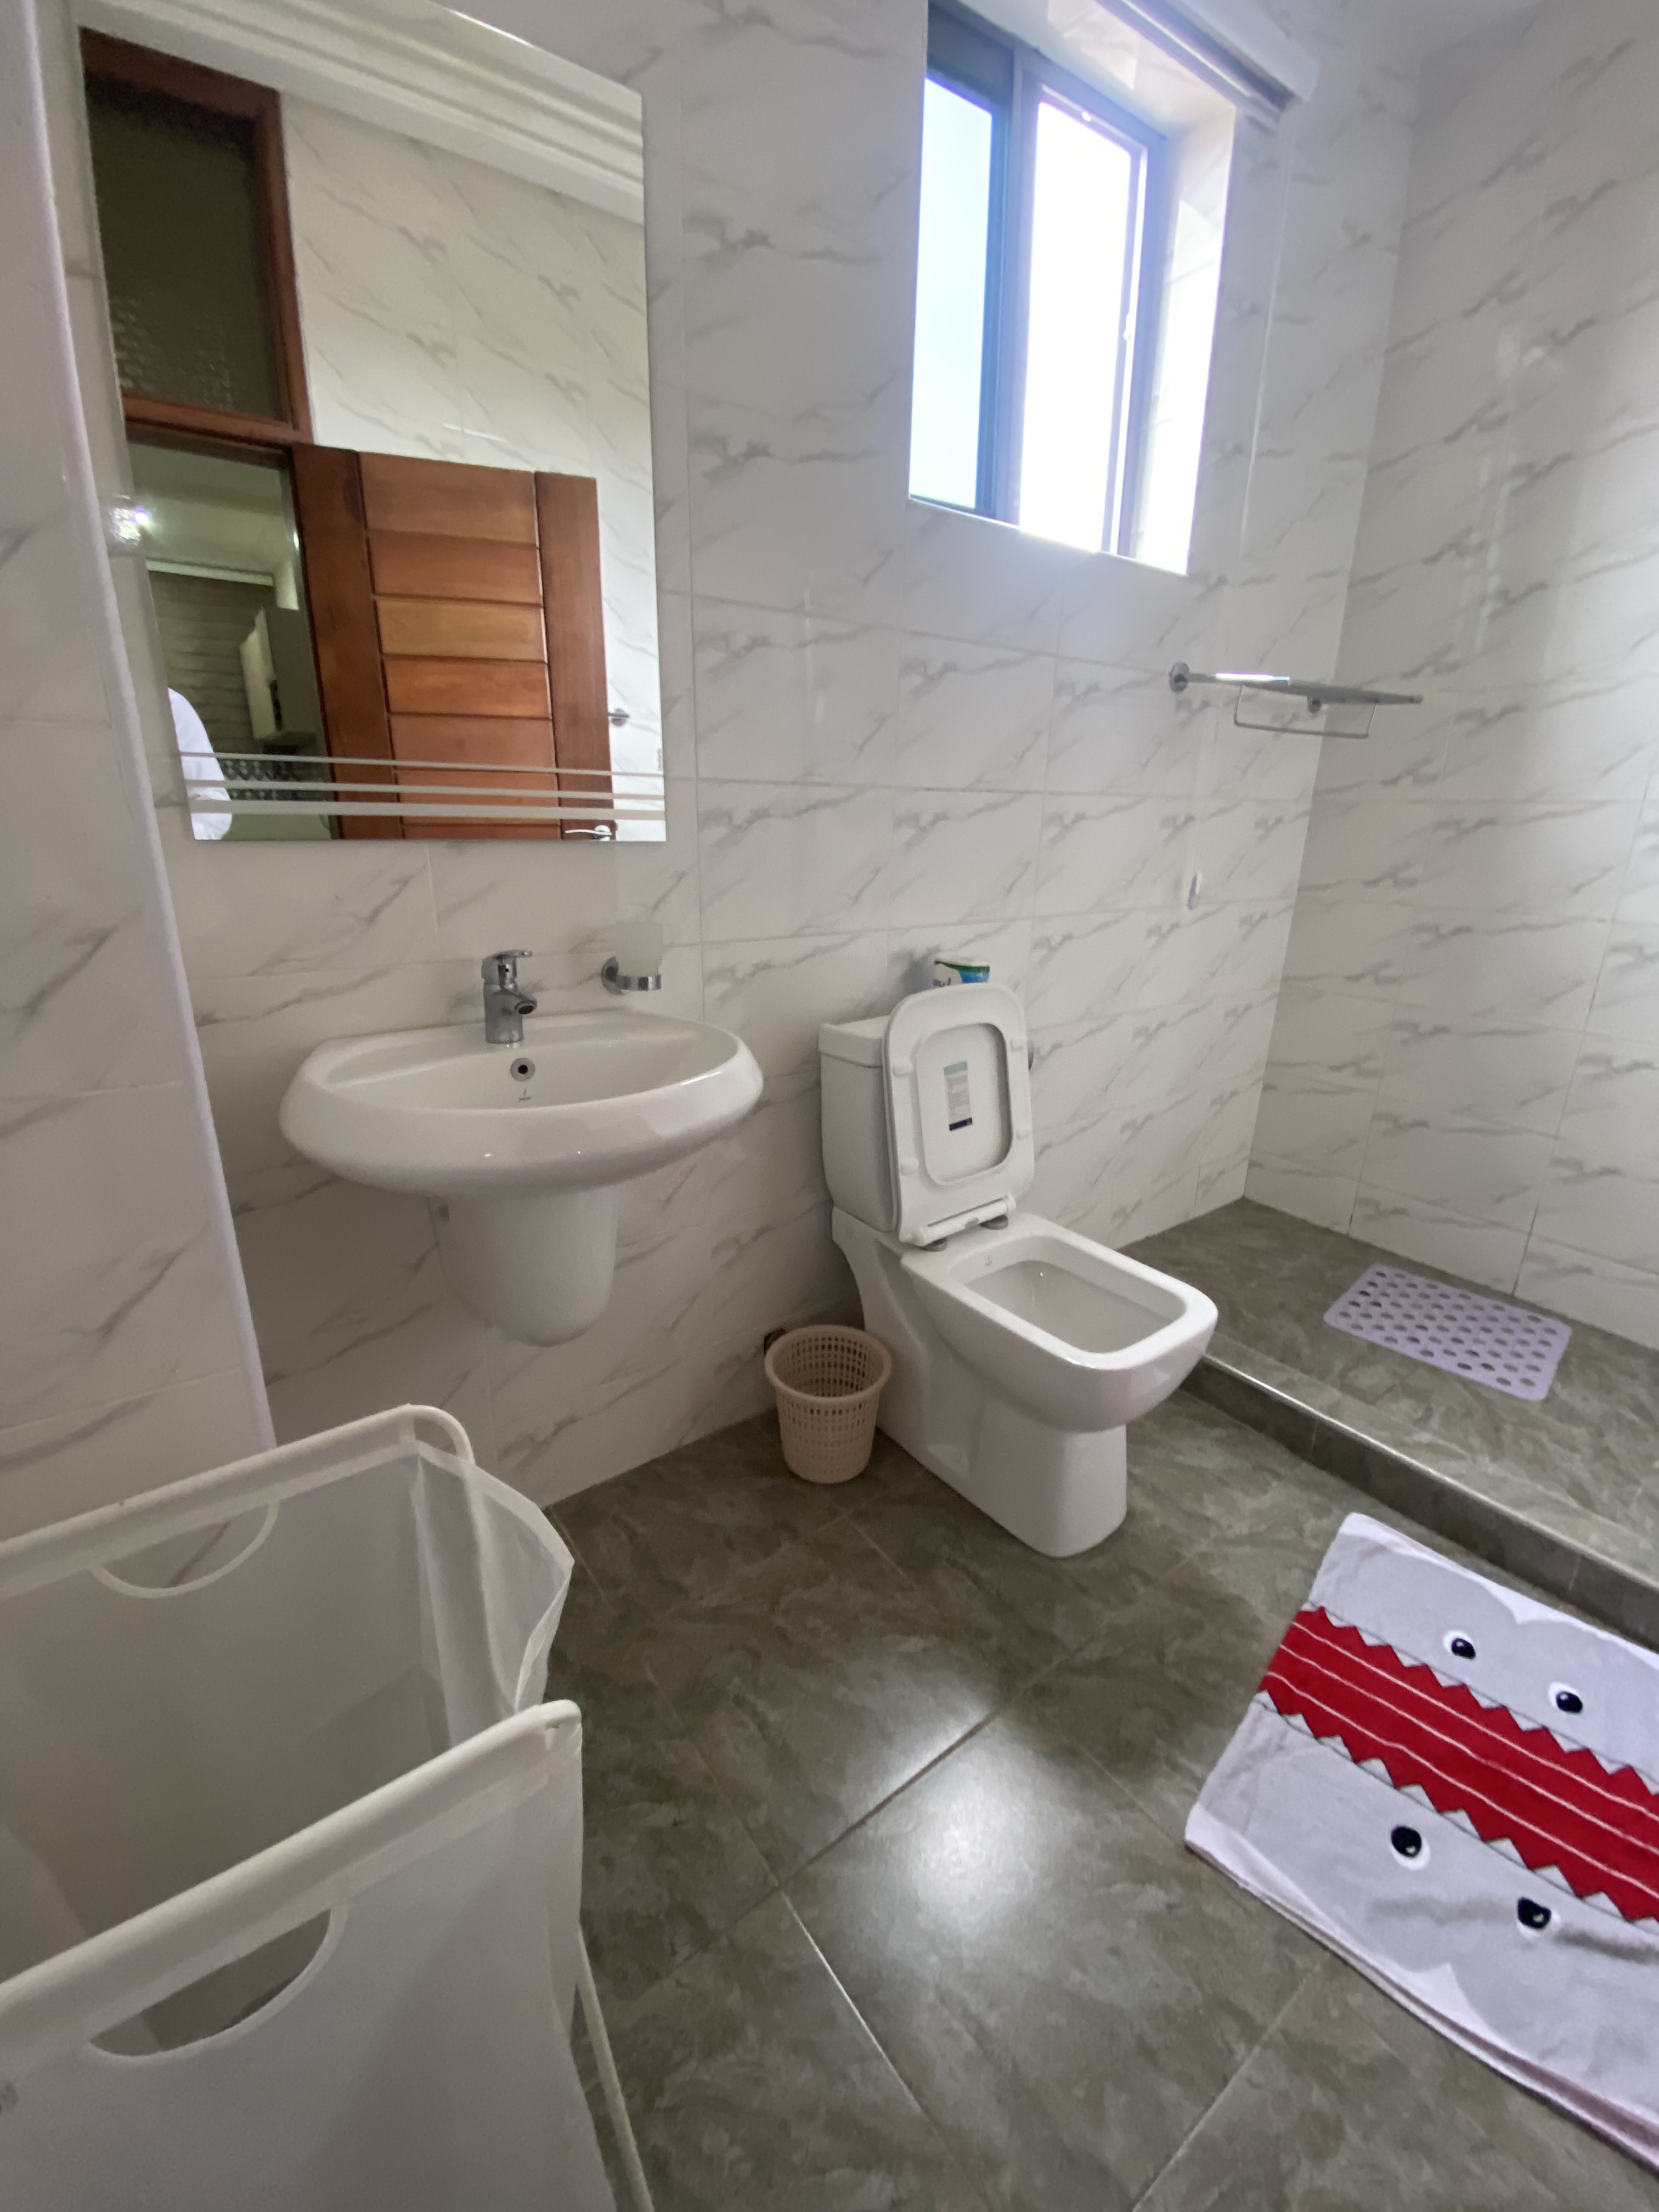 One 1-bedroom Furnished Apartment for Rent at Tse Addo